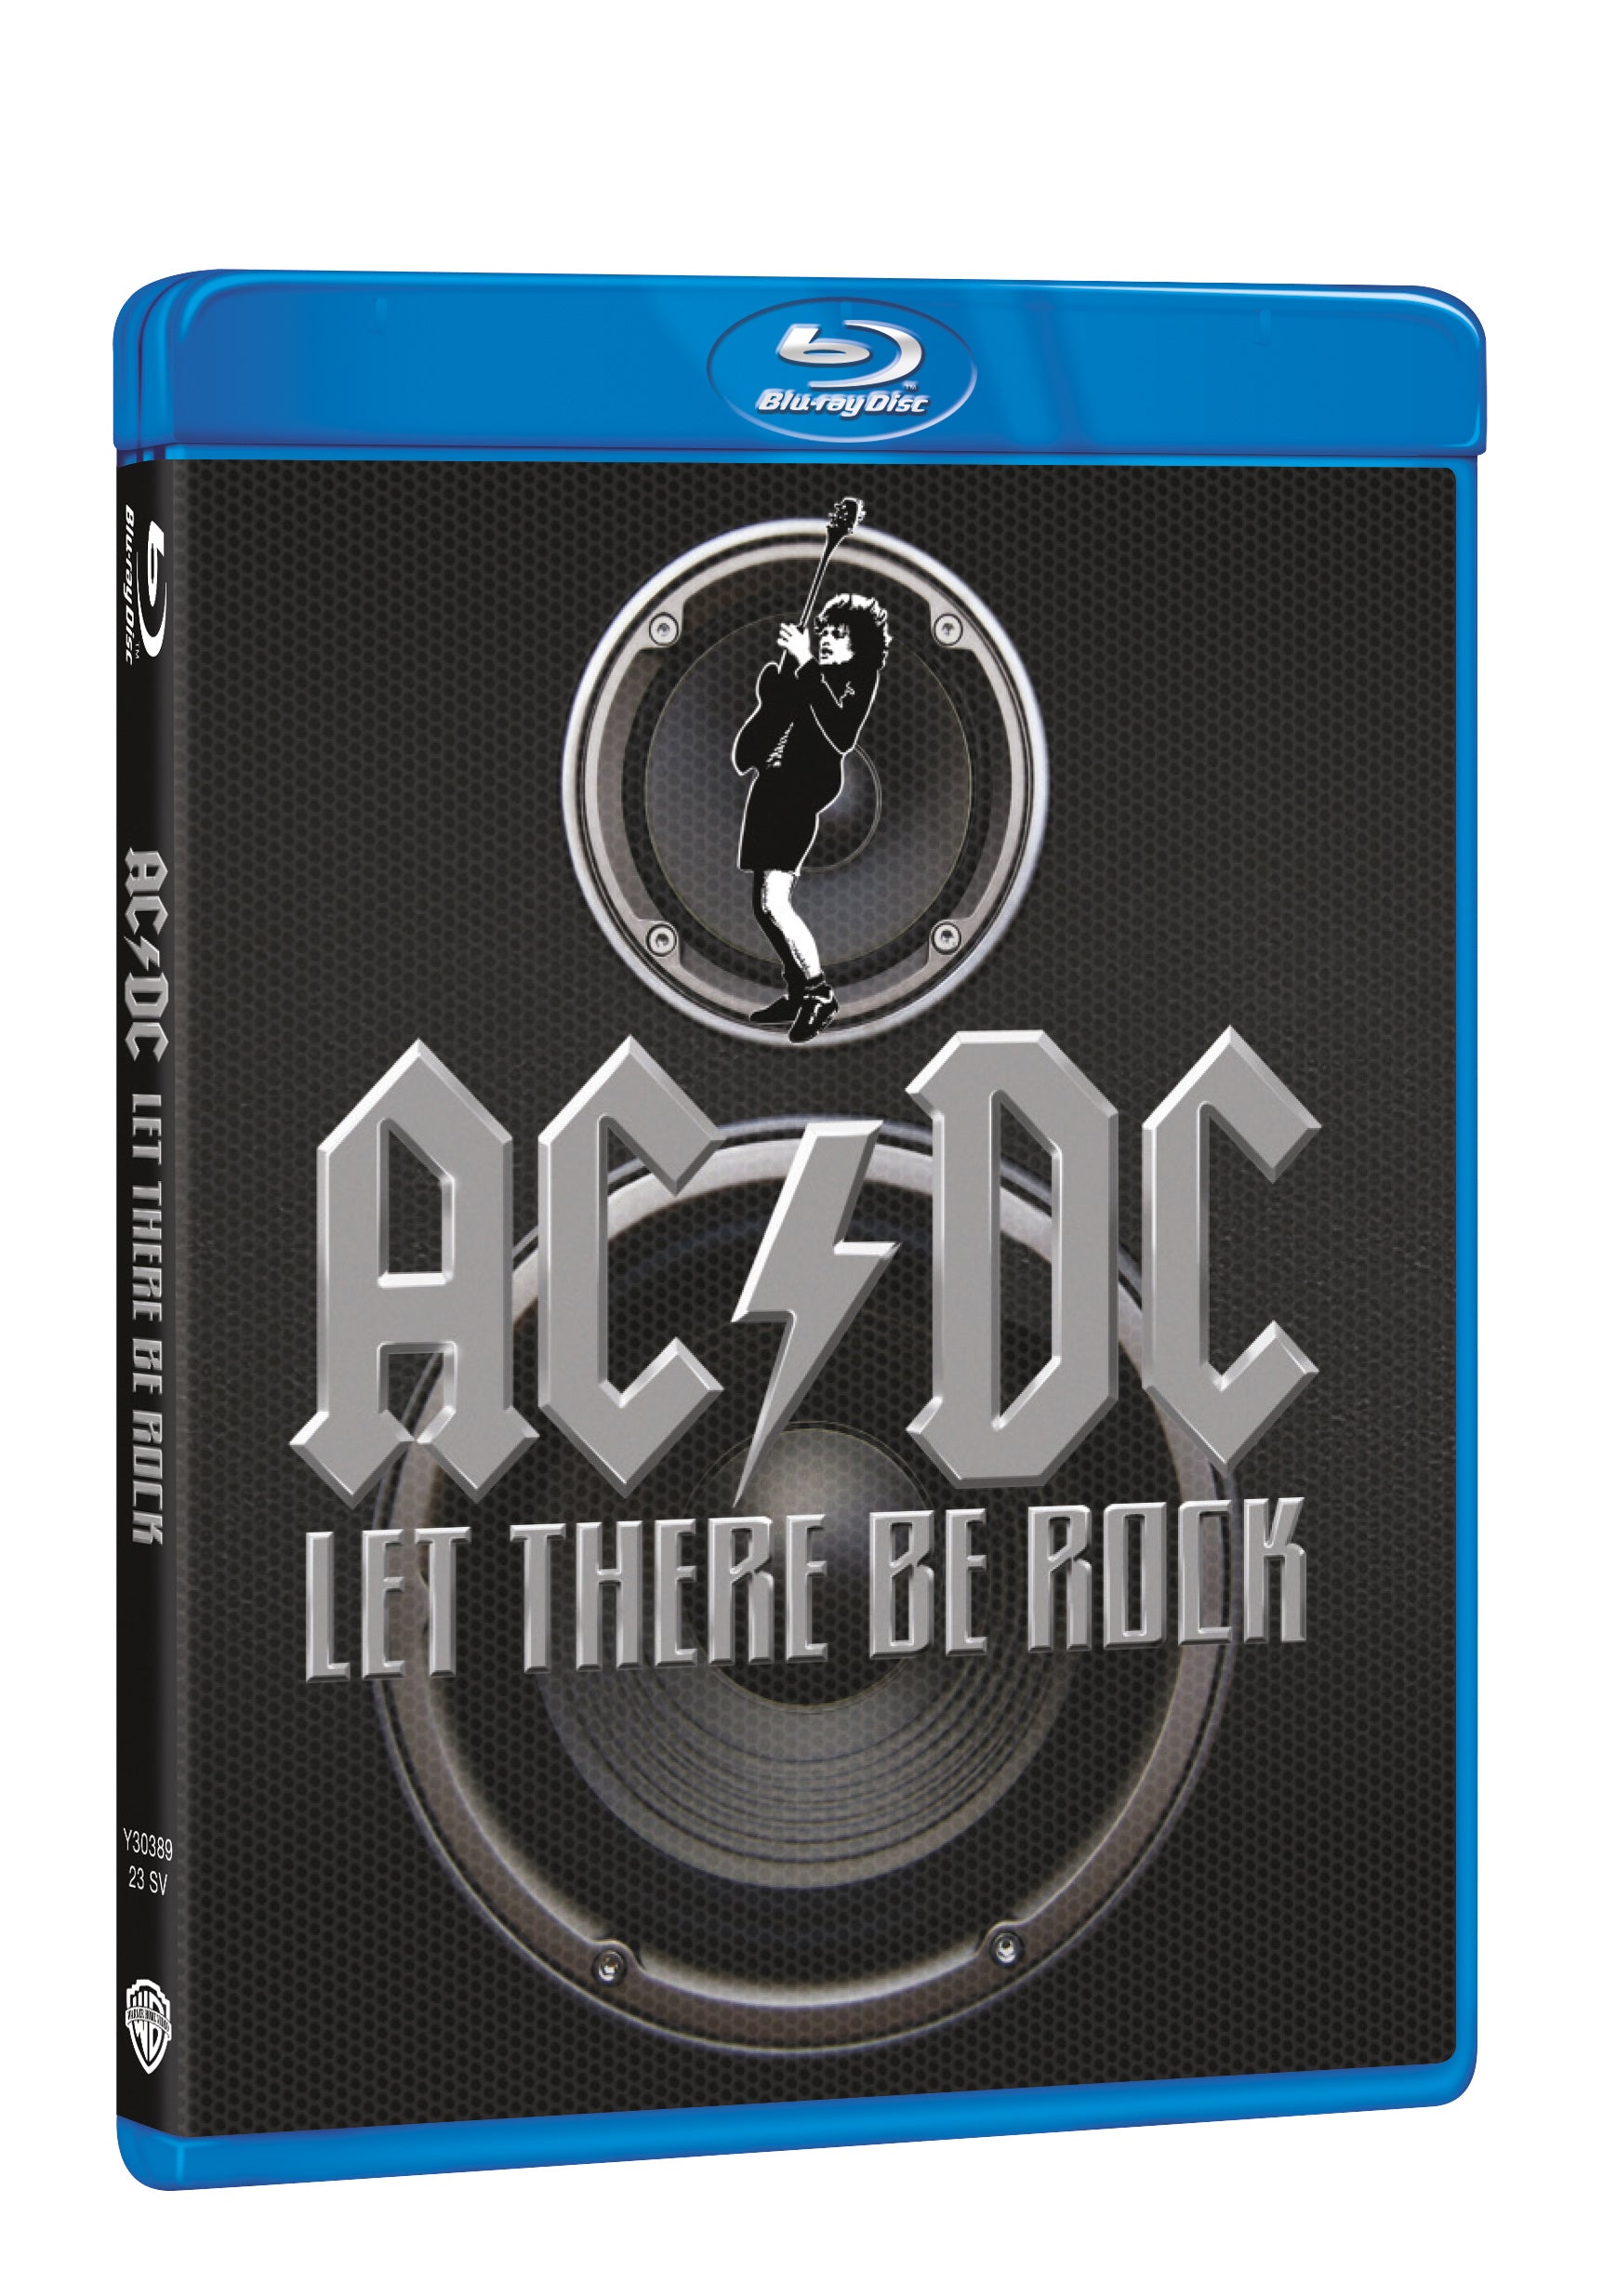 AC/DC: Let there be Rock BD / AC/DC: Let there be Rock BD - Czech version